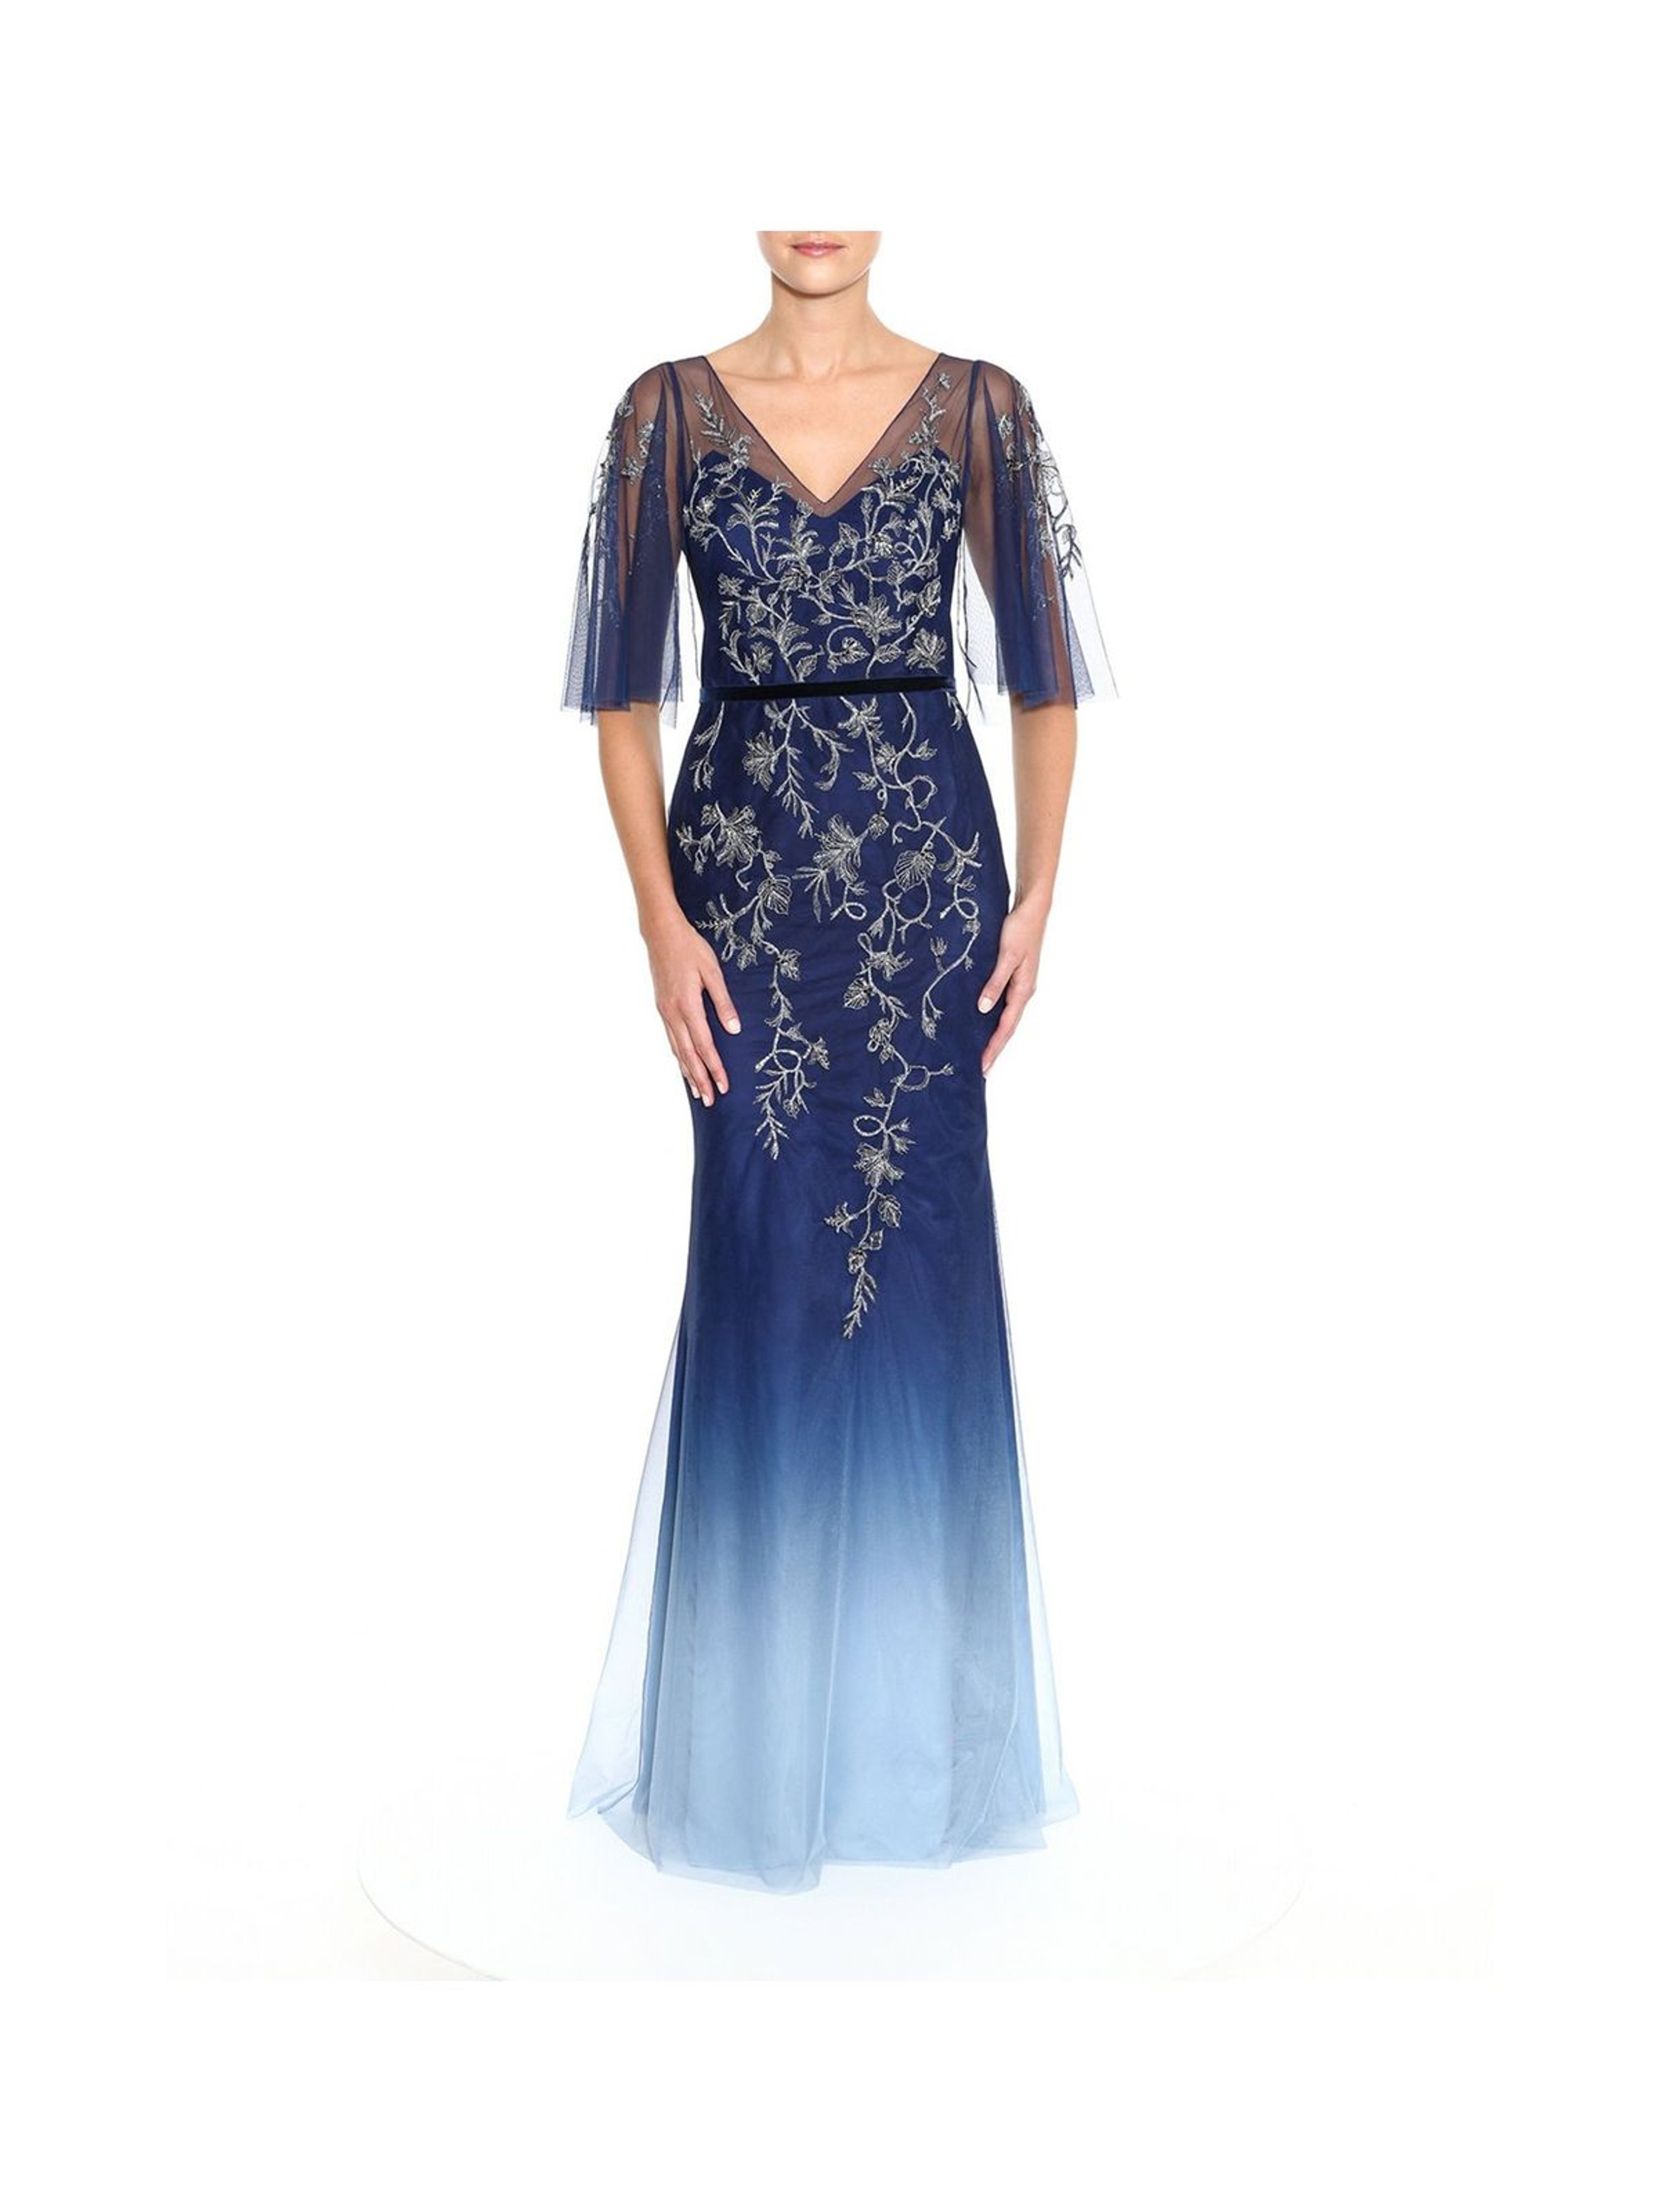 MARCHESA NOTTE MARCHESA NOTTE FLUTTER SLEEVE EMBROIDERED GOWN